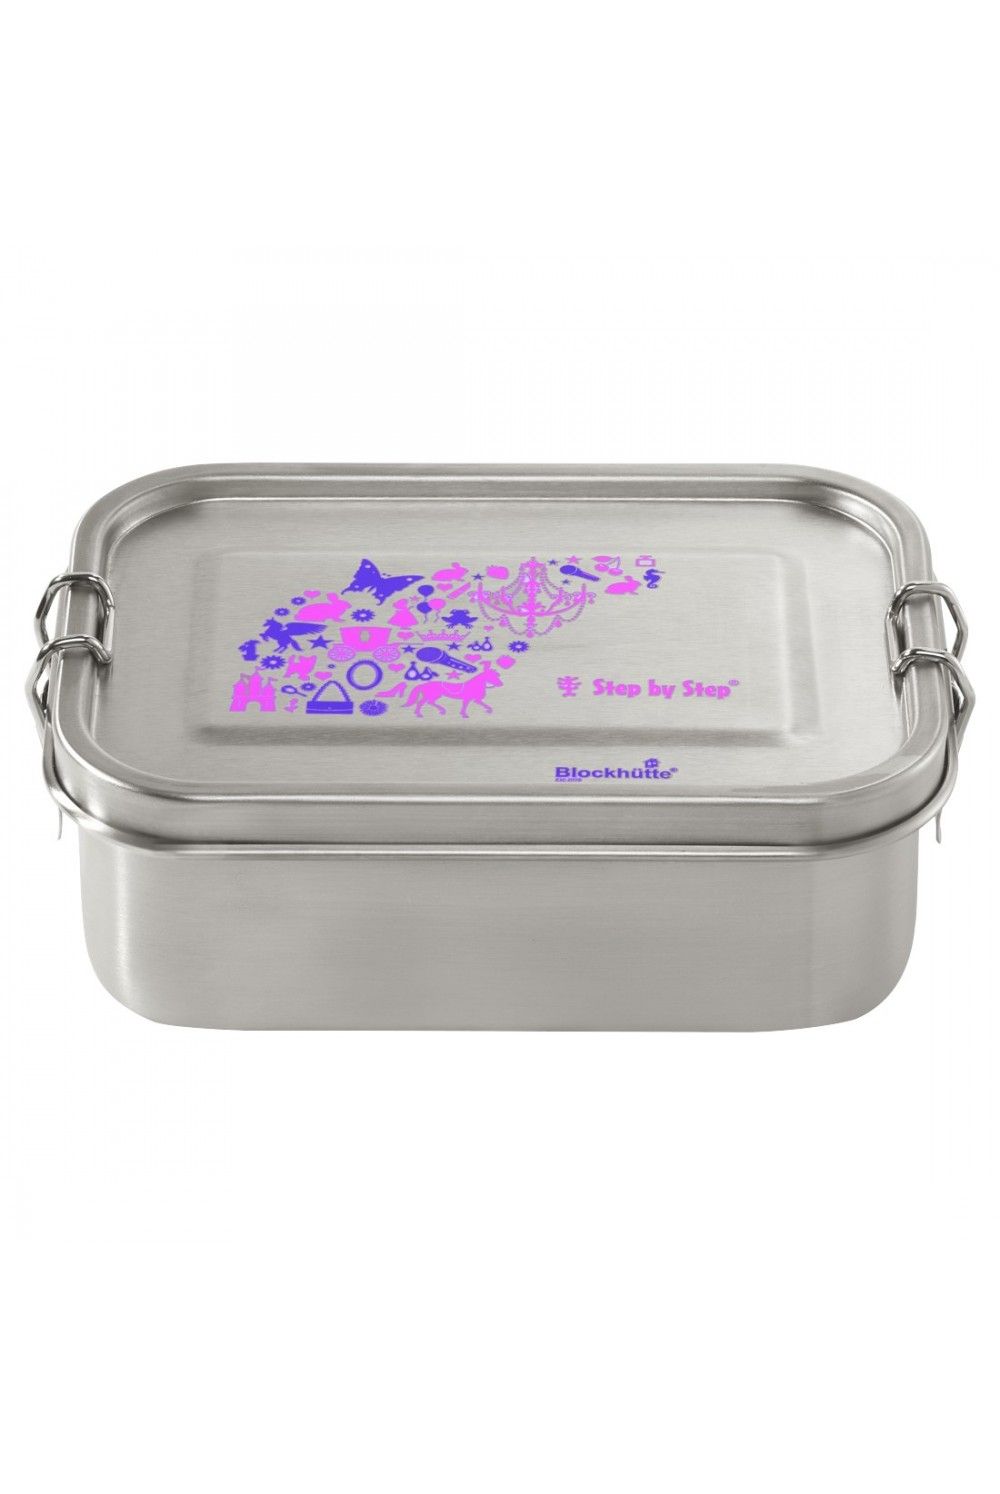 Step by Step Lunchbox Stainless Steel Purple & Rose